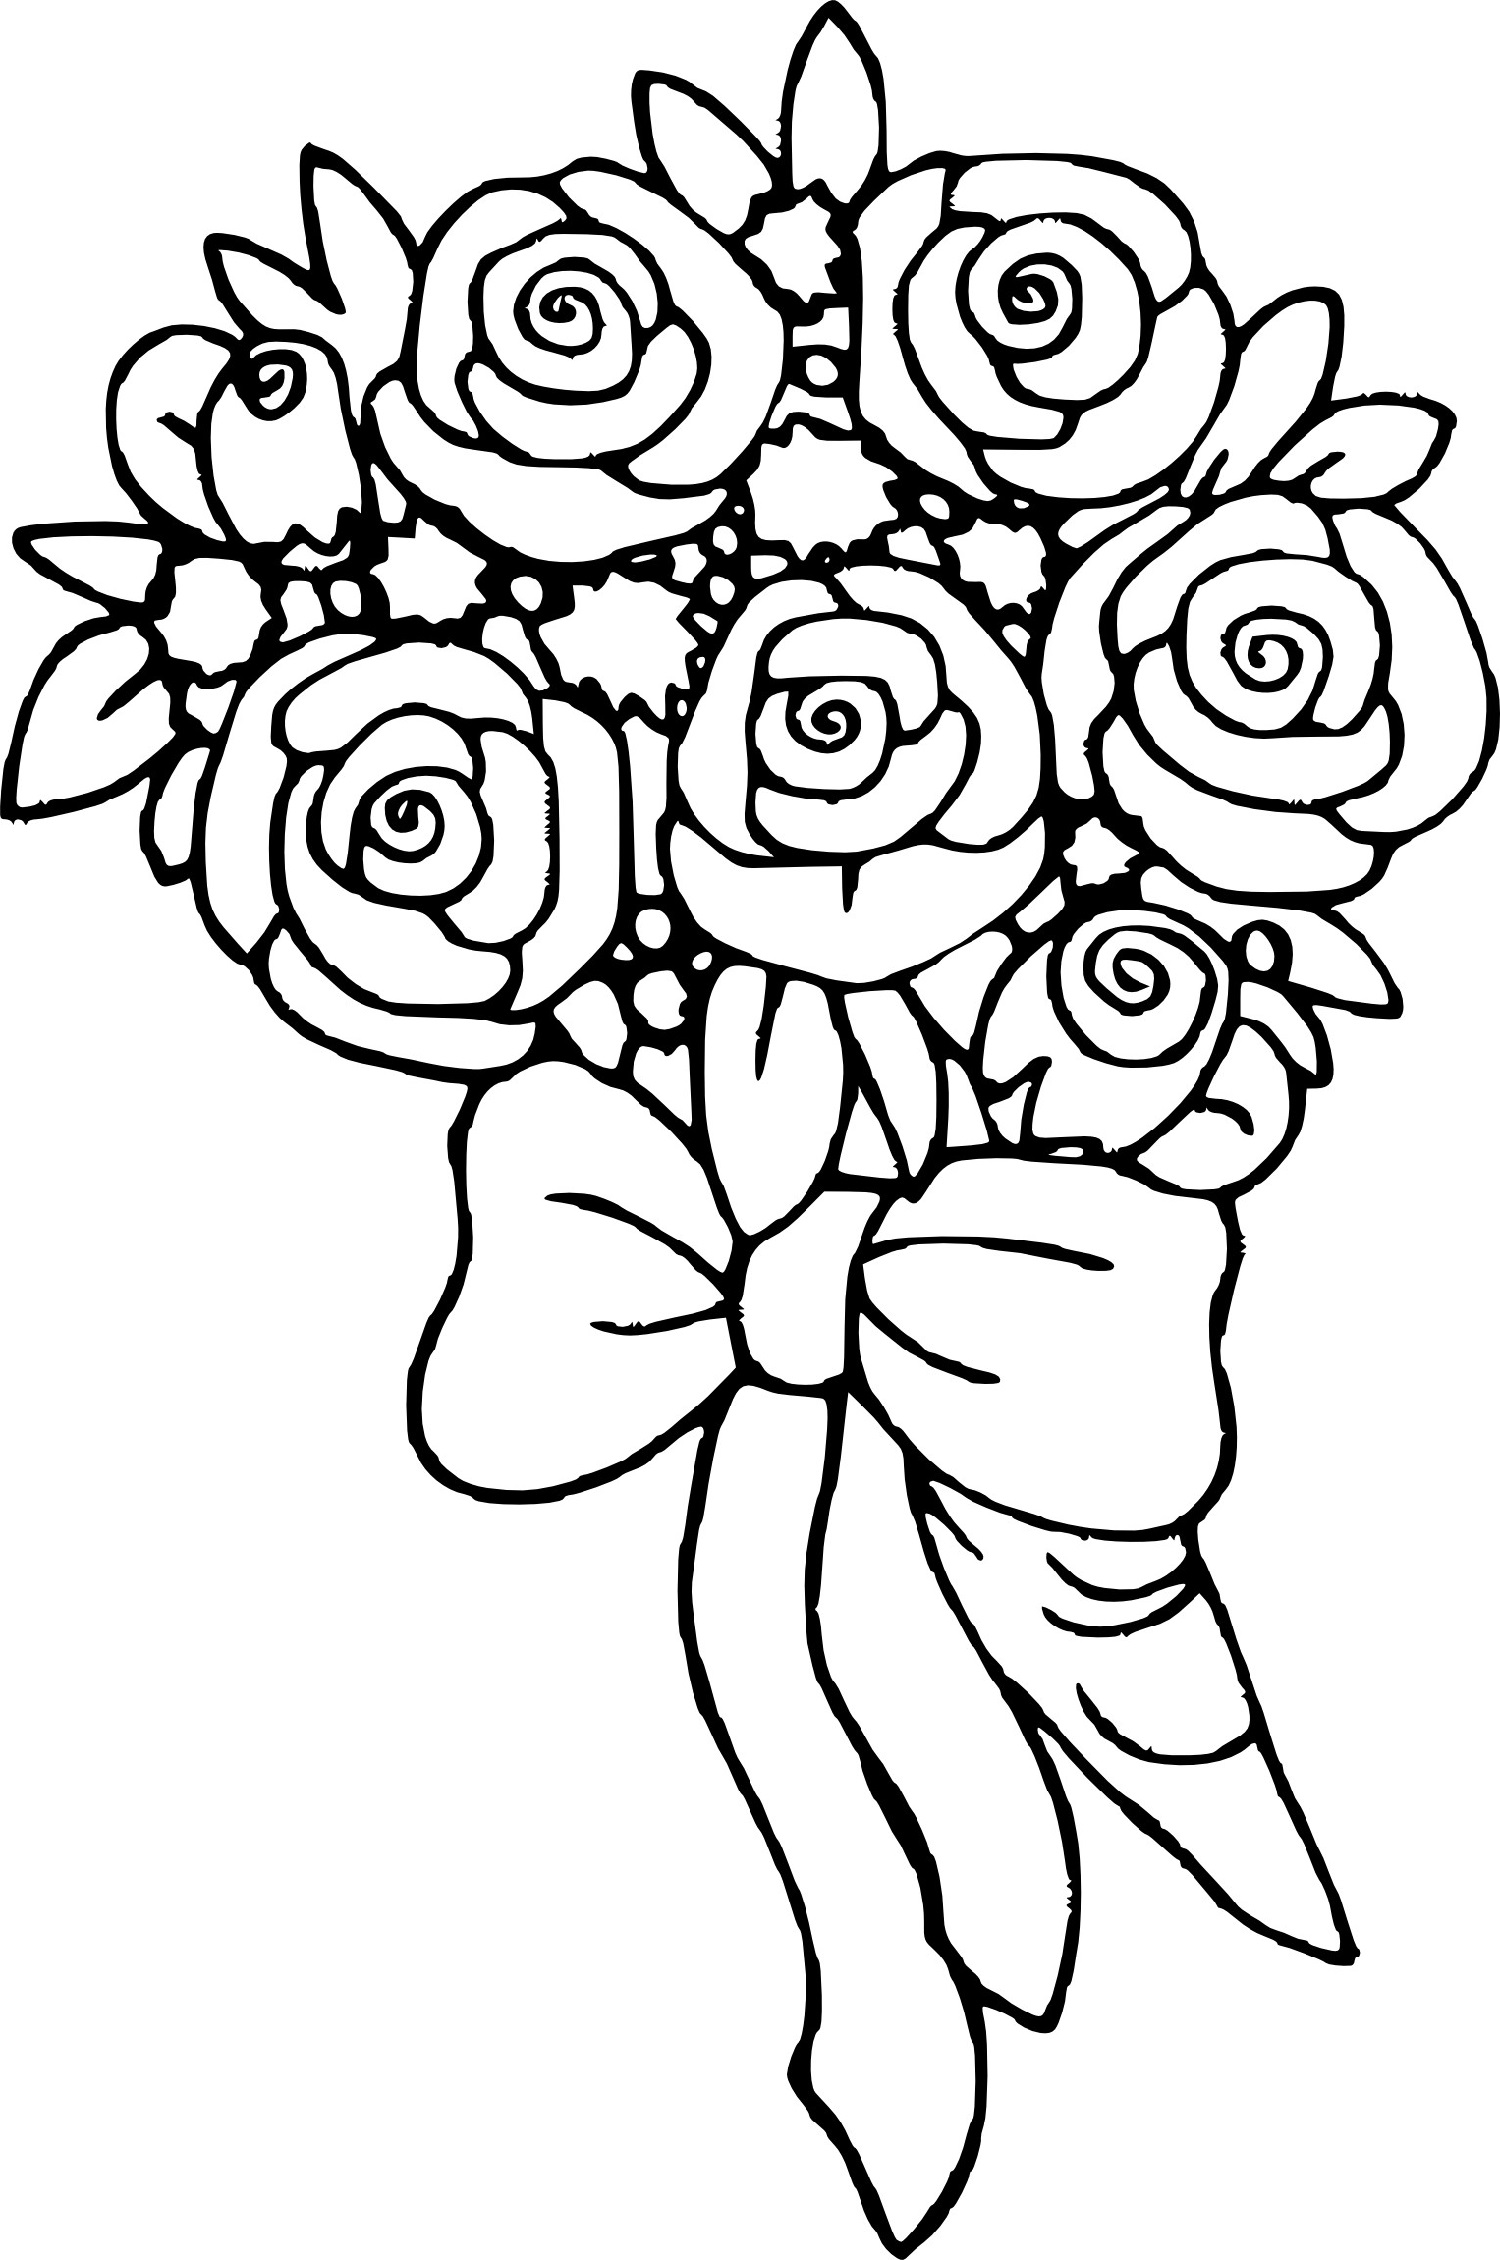 Download Coloring Pages | Rose Coloring Realistic Flower Bouquet